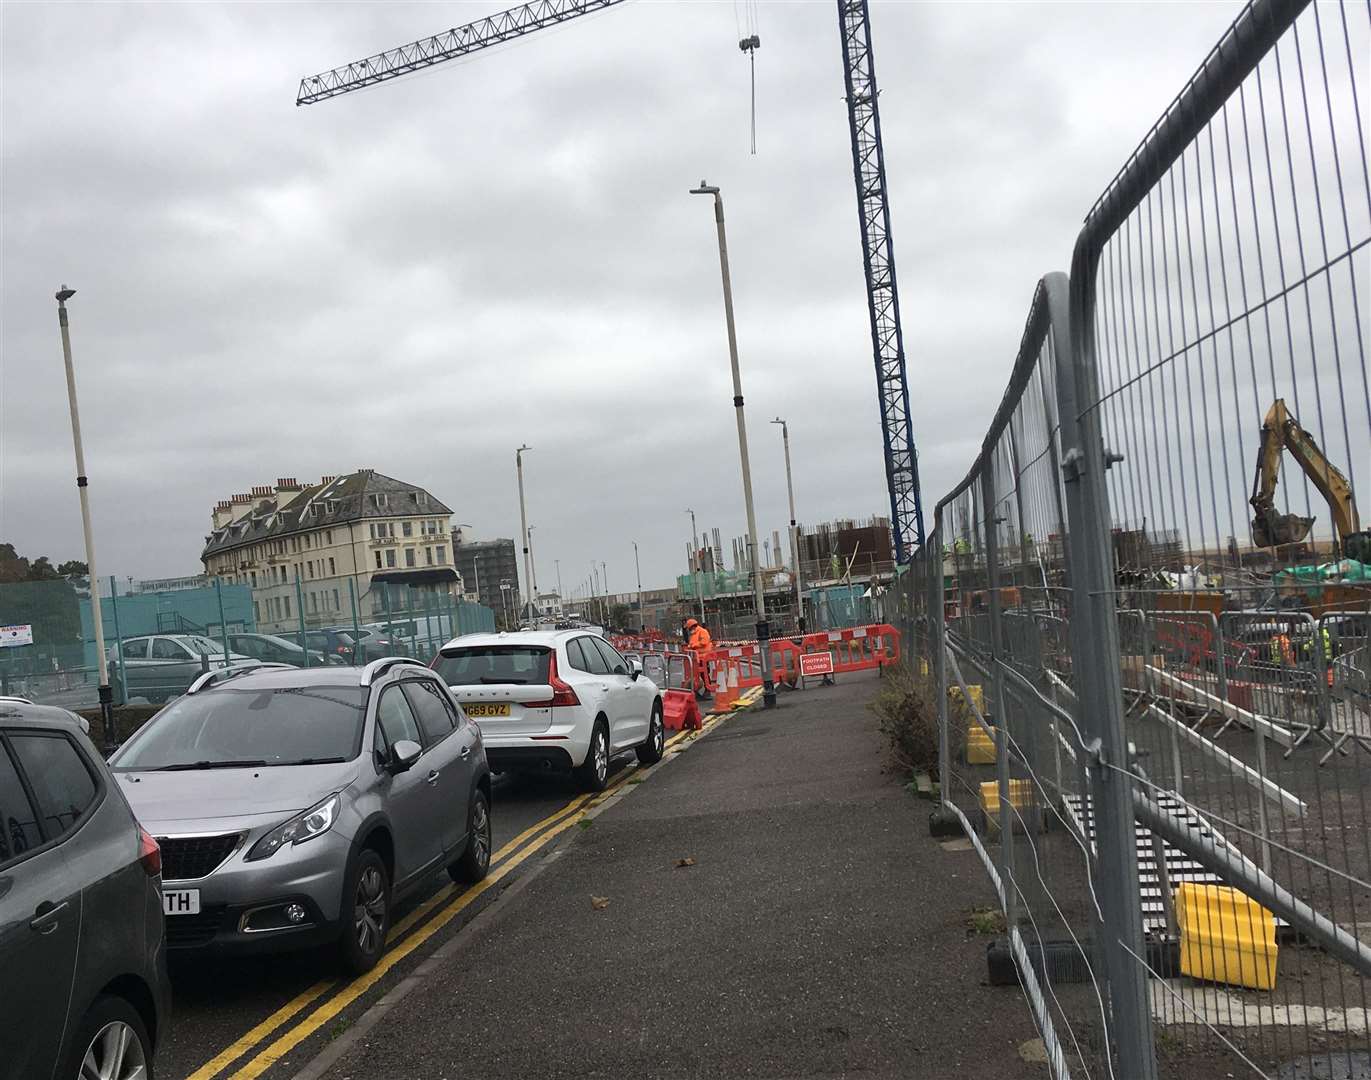 There are parking issues along Lower Sandgate Road and Marine Crescent due to the ongoing work on the seafront development. Picture: Cllr Mary Lawes